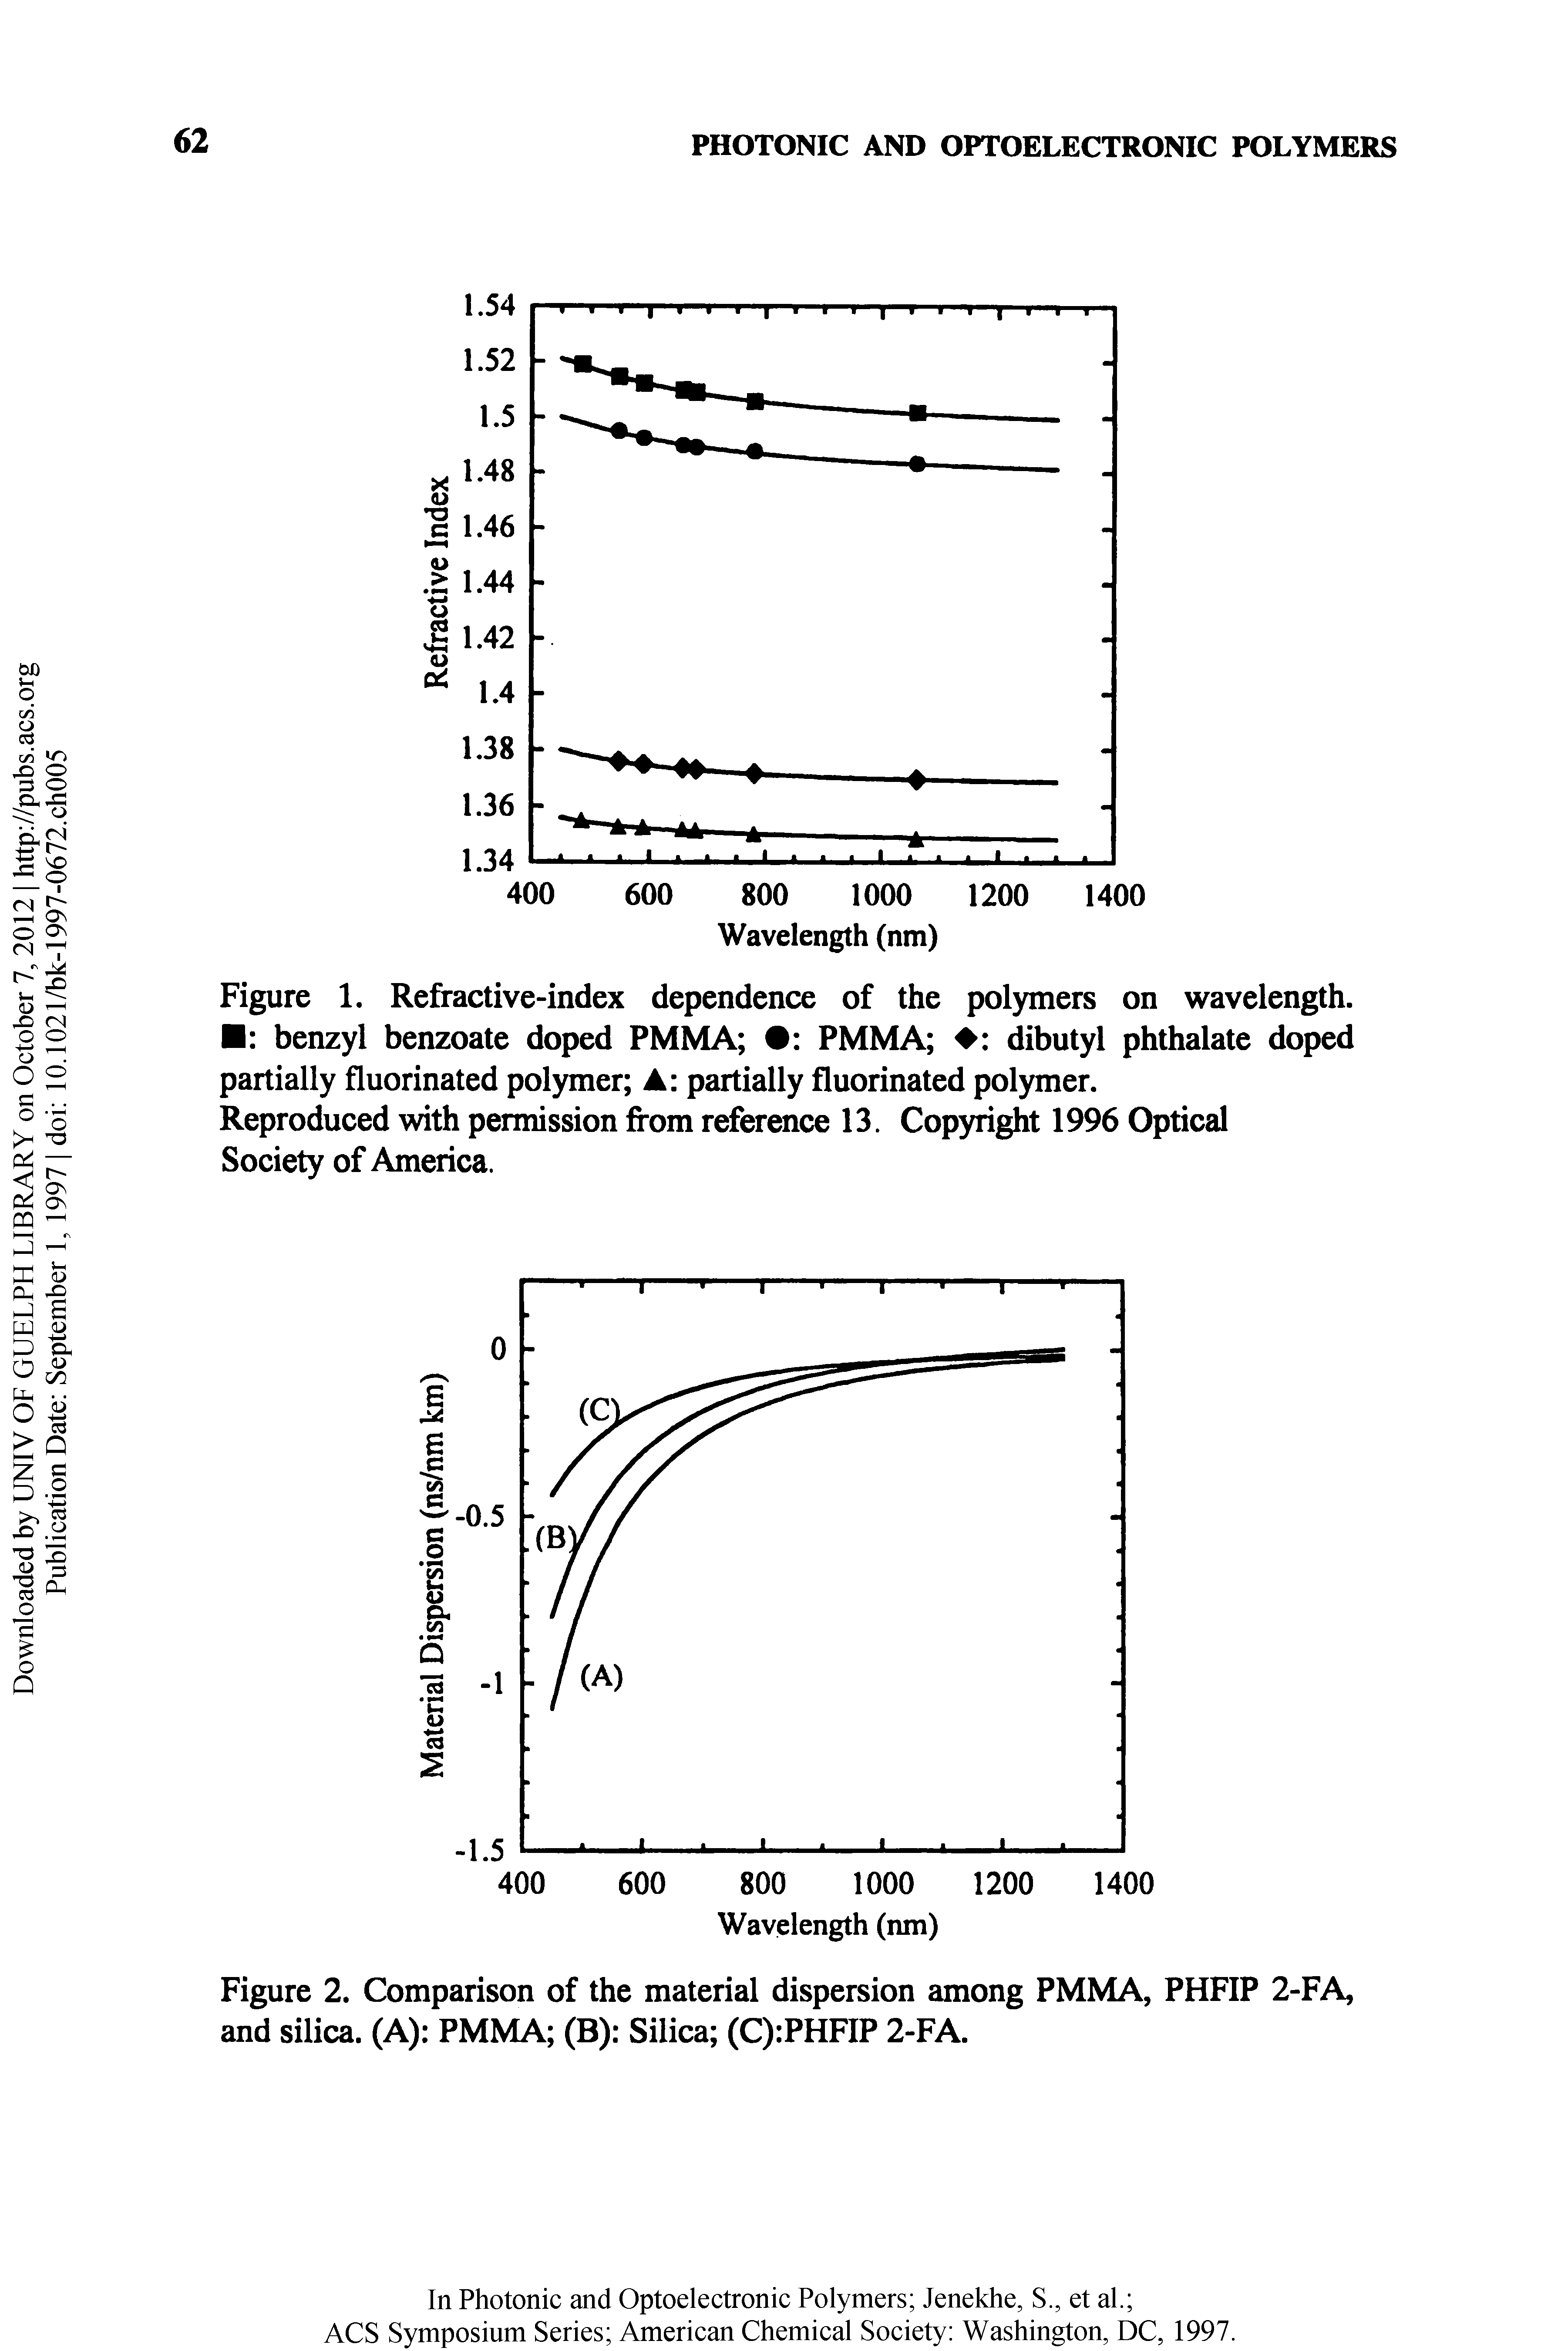 Figure 1. Refractive-index dependence of the polymers on wavelength. benzyl benzoate doped PMMA PMMA dibutyl phthalate doped partially fluorinated polymer A partially fluorinated polymer.